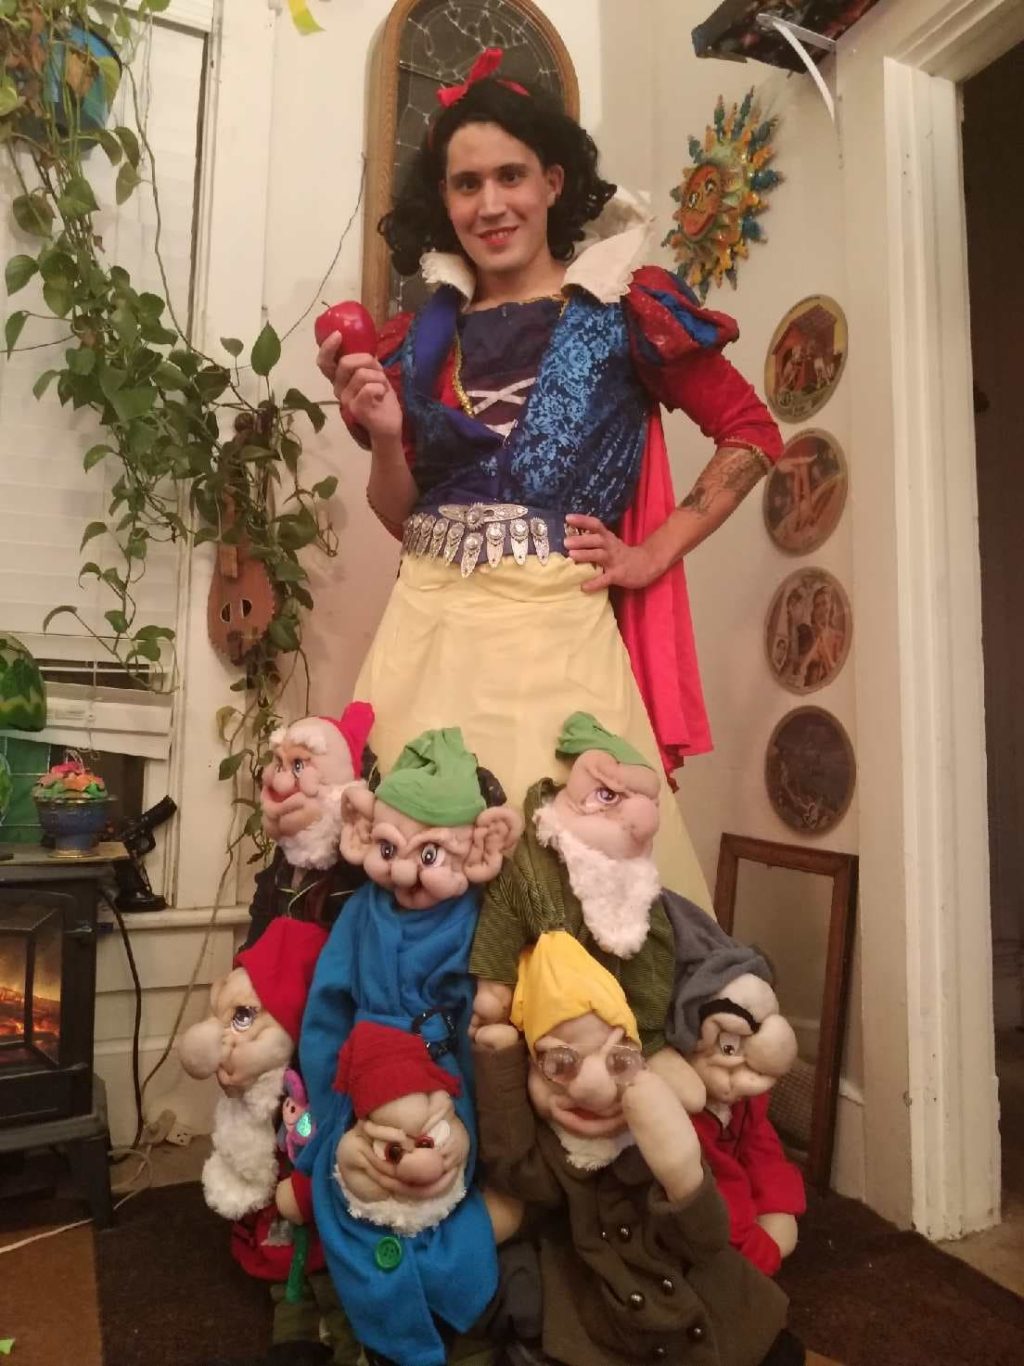 snow white and the seven dwarfs fancy dress adults